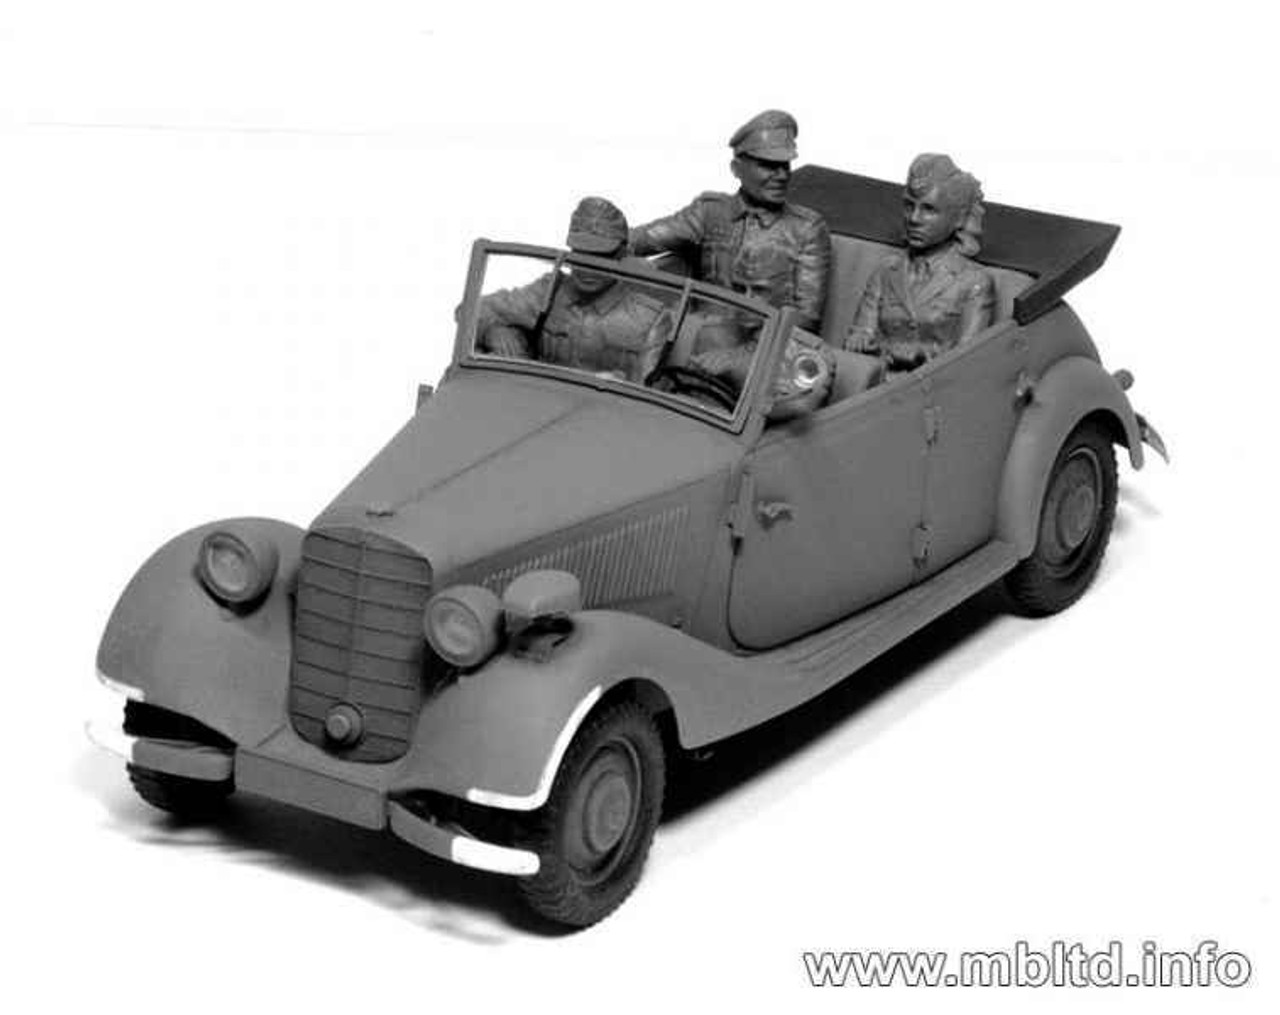 MBL03570 1/35 Master Box WWII German Military Passengers x6 figures NO CAR 3570 MMD Squadron